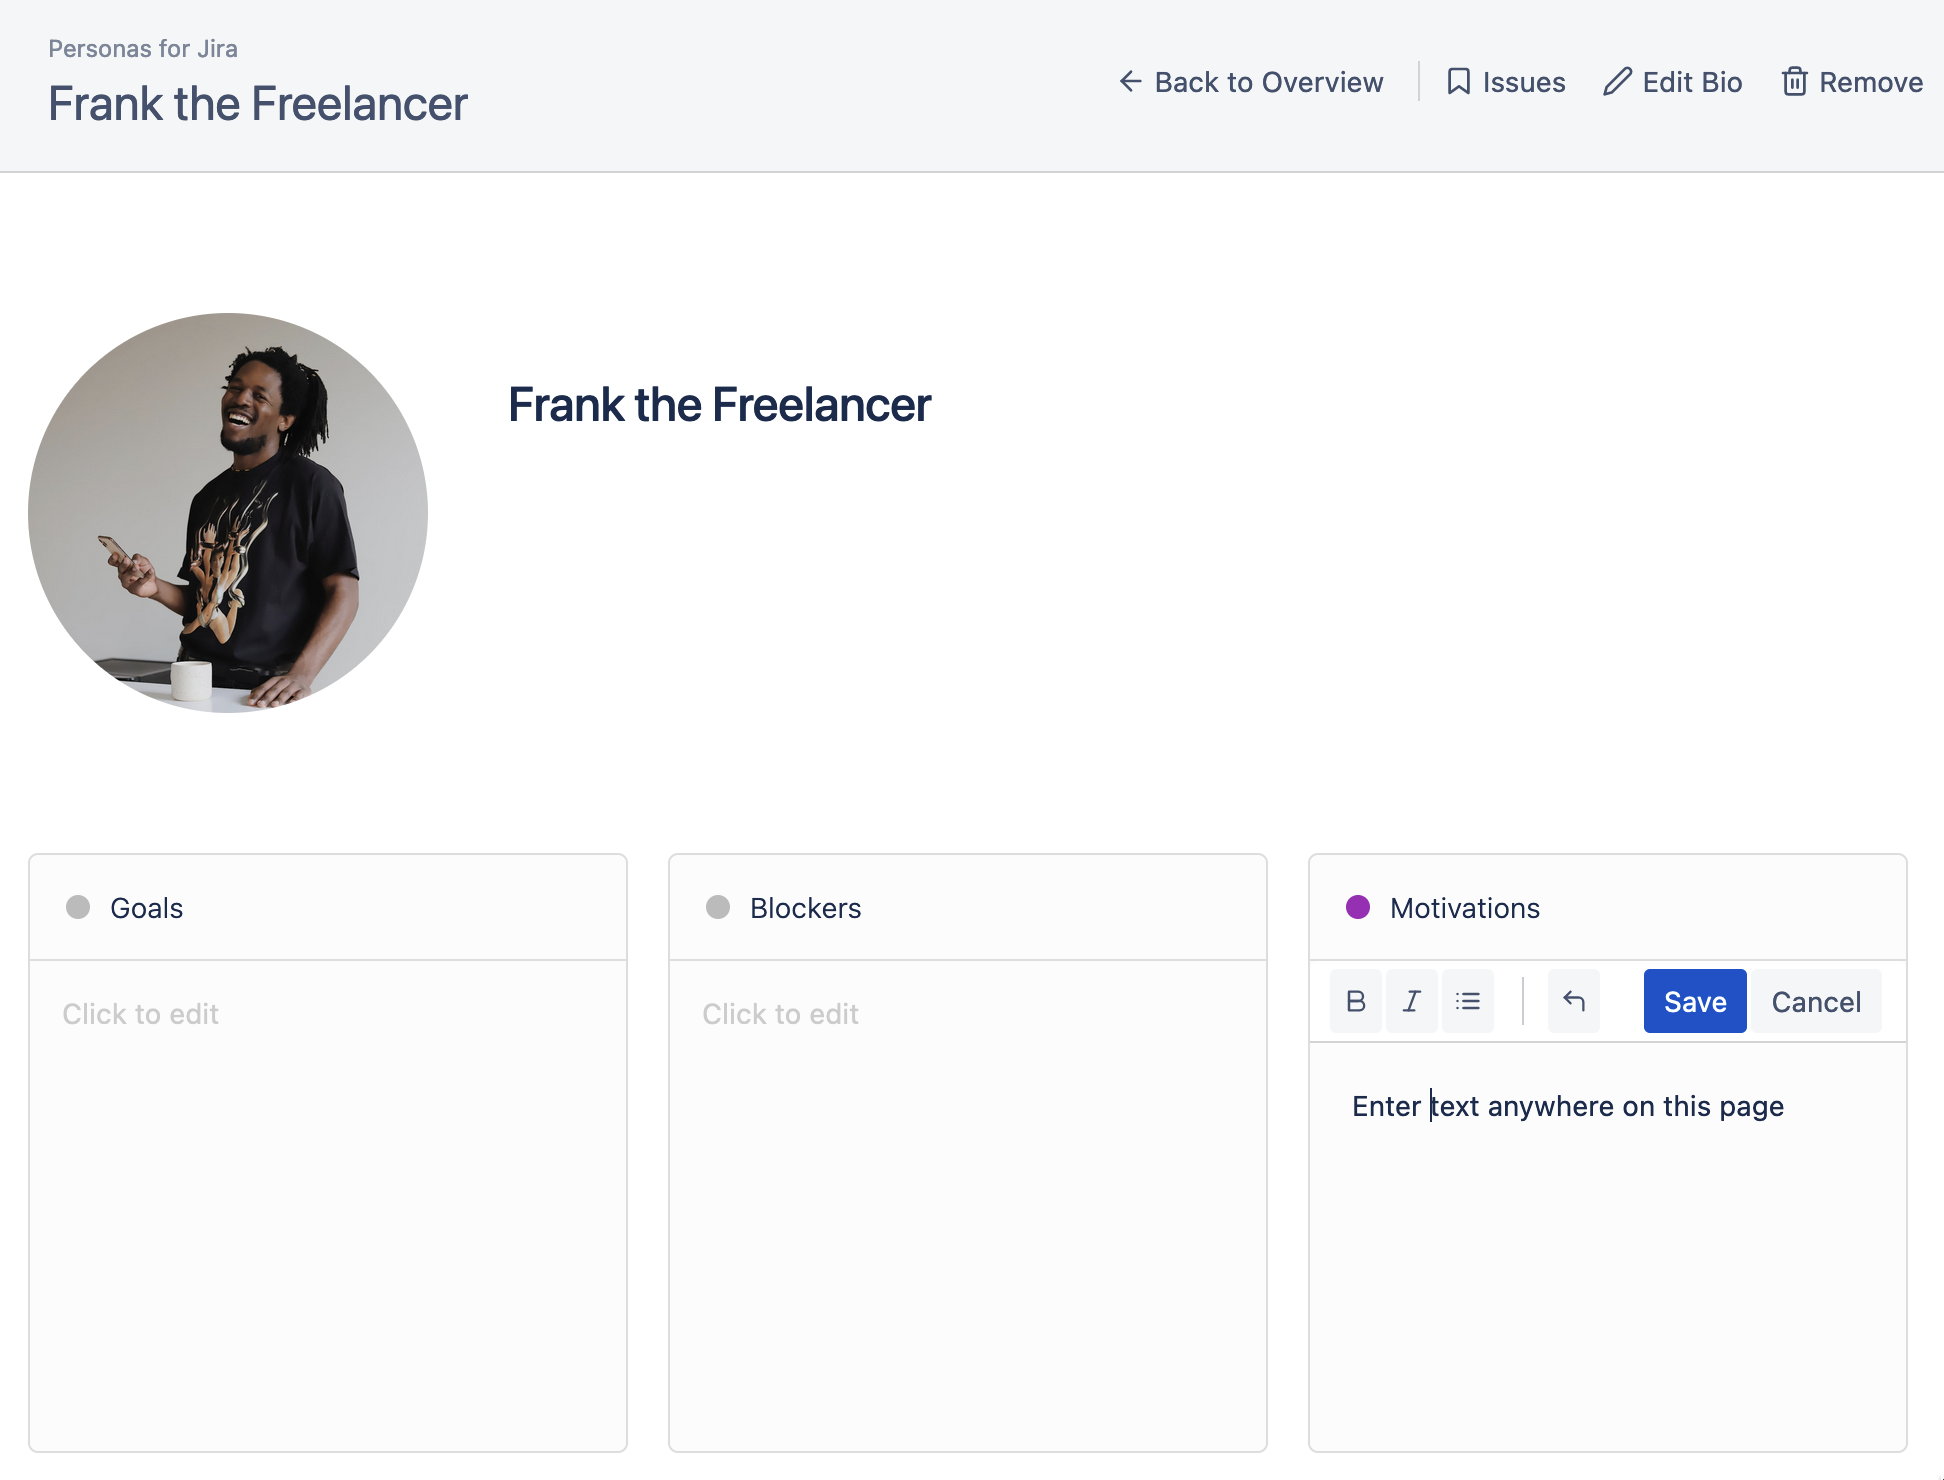 Create Screen for Personas for Jira